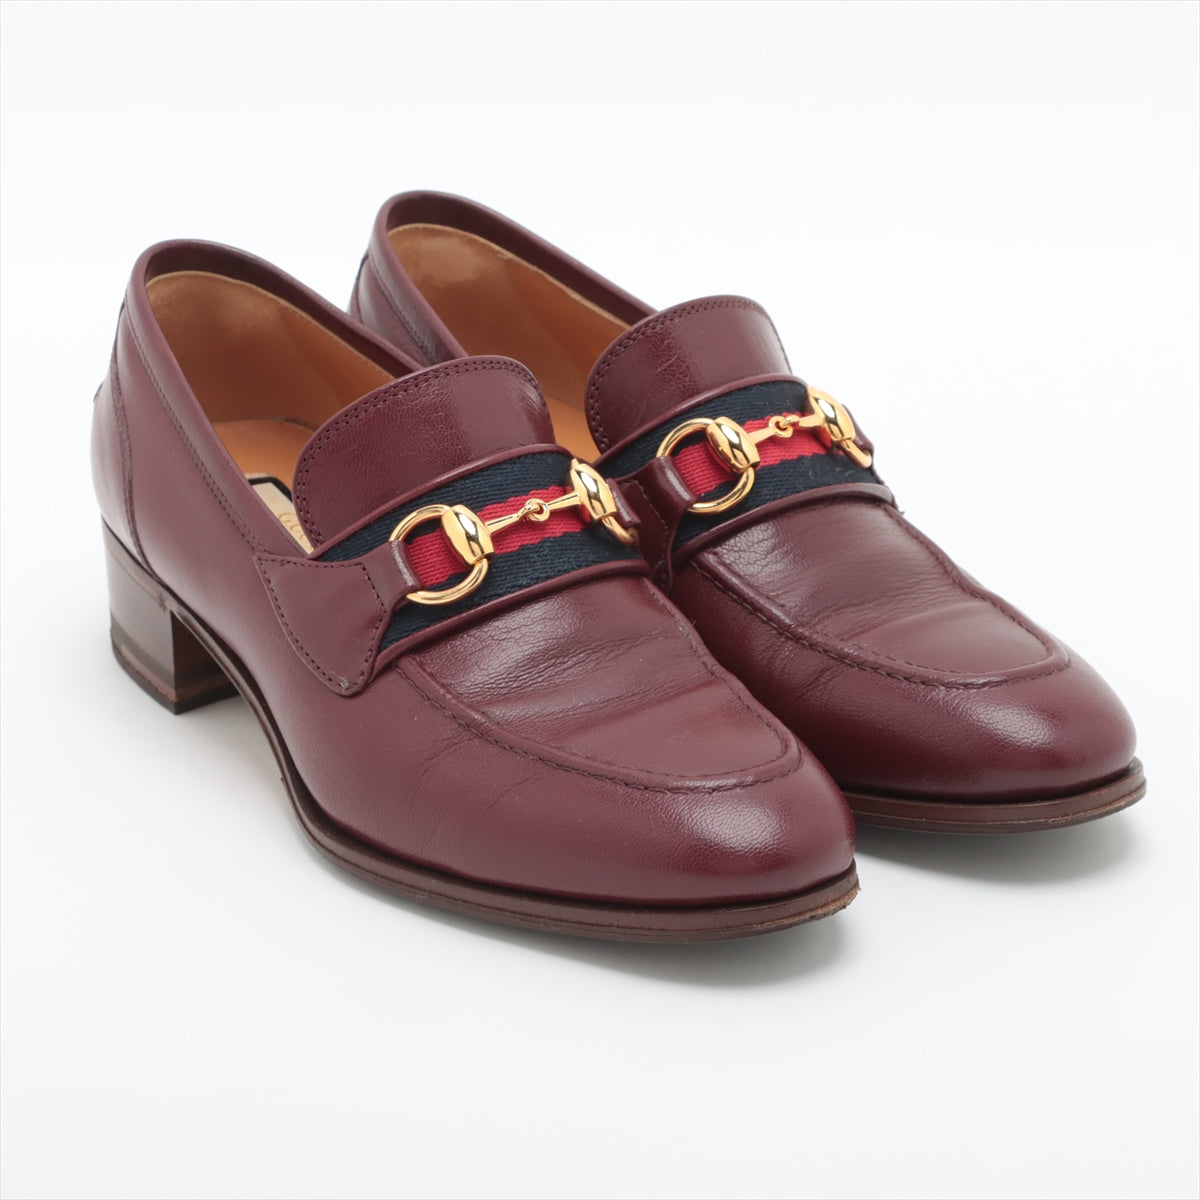 Gucci Horsebit Leather Loafer EU36 Ladies' Bordeaux 660819 Sherry Line Lift repair box There is a bag